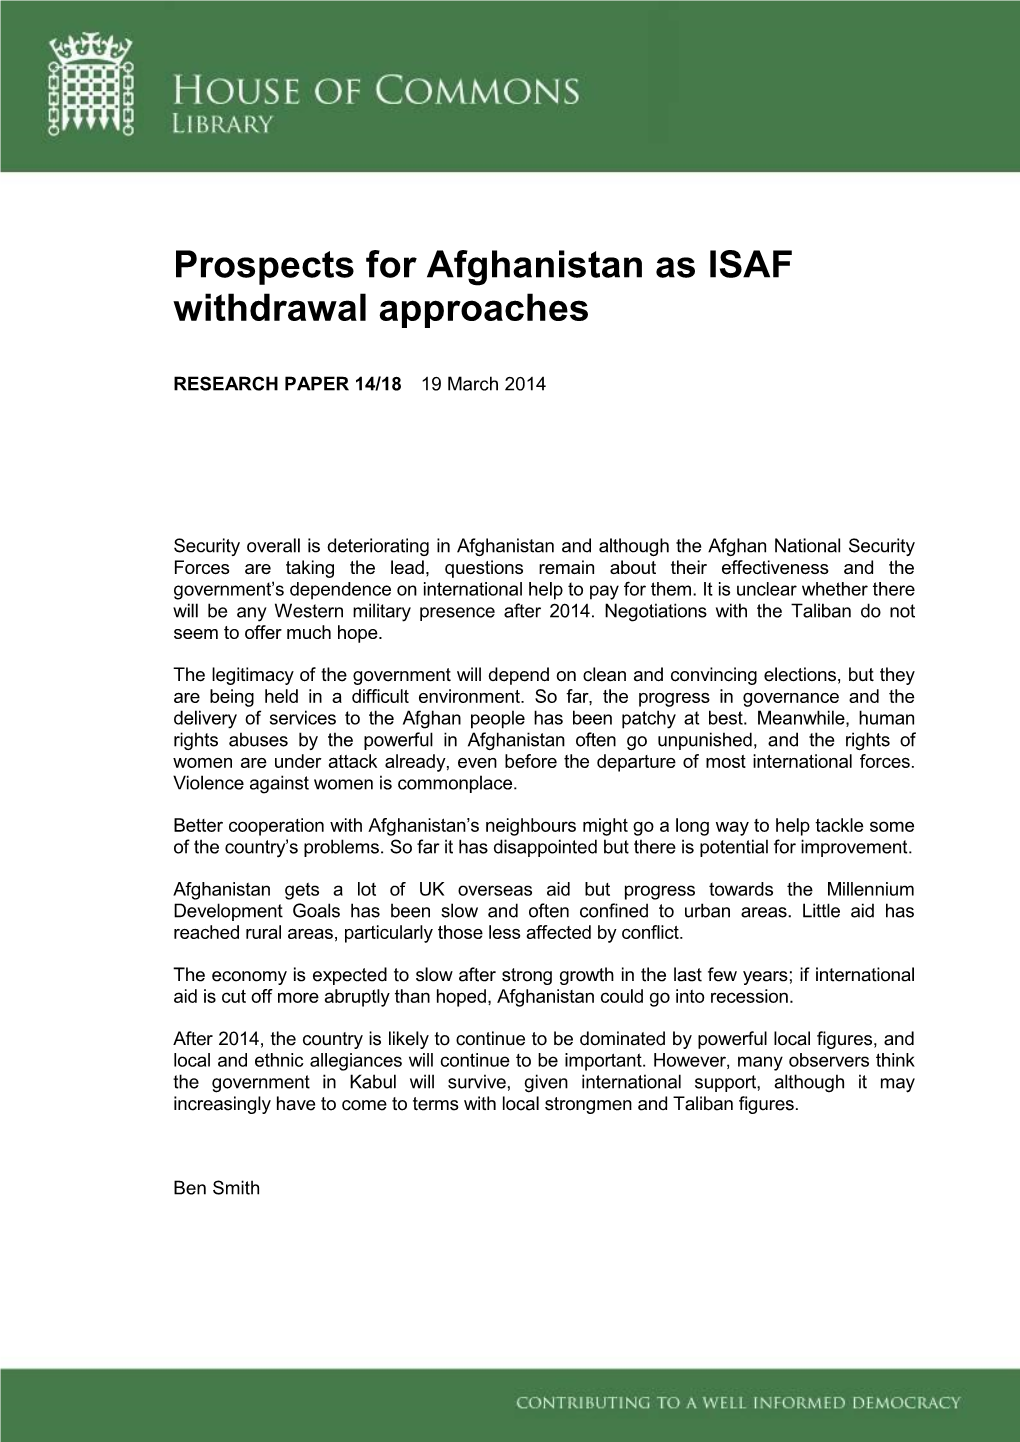 Prospects for Afghanistan As ISAF Withdrawal Approaches